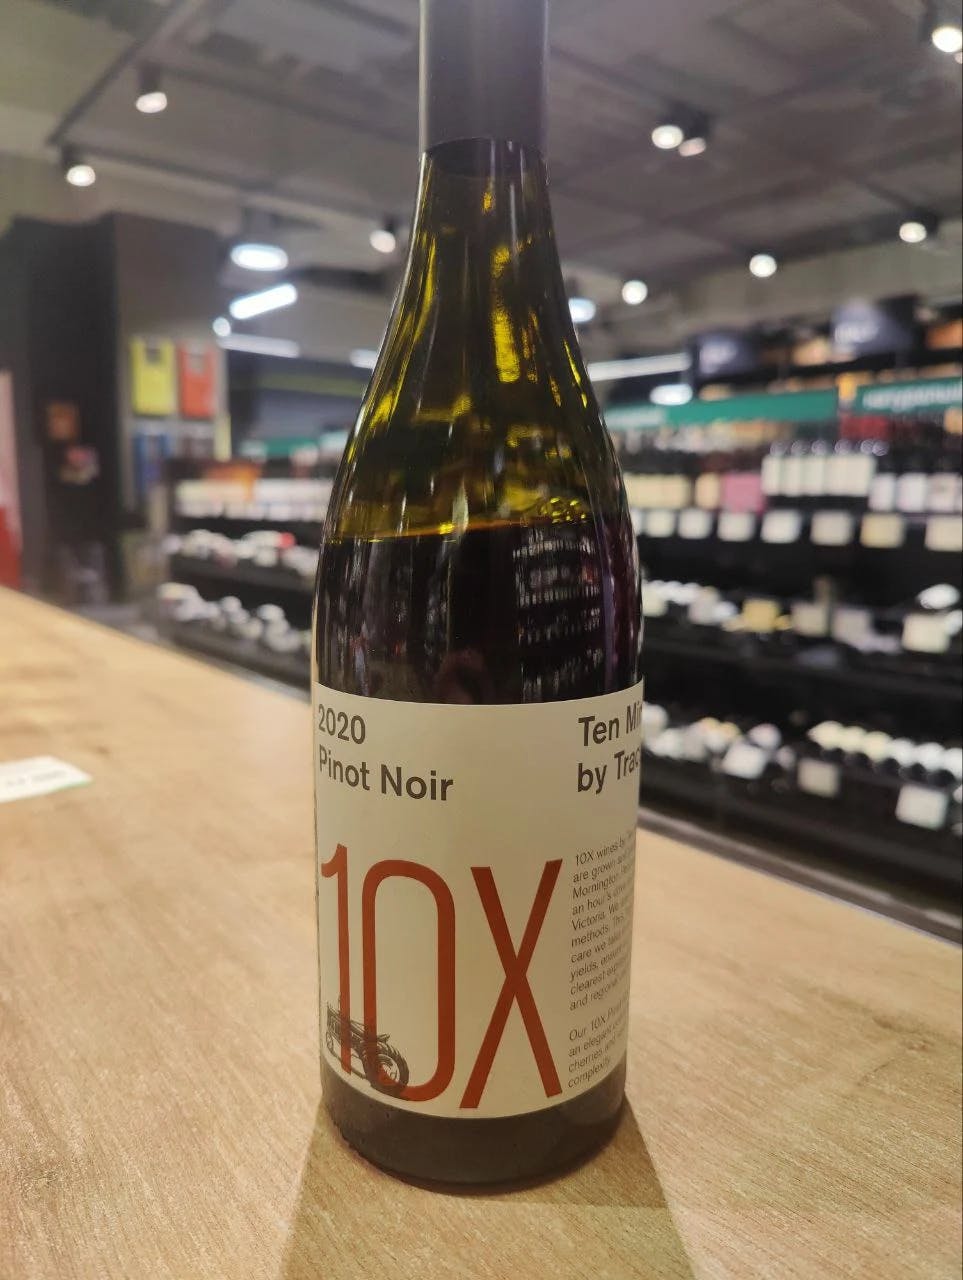 Ten Minutes by Tractor 10X Pinot Noir 2020